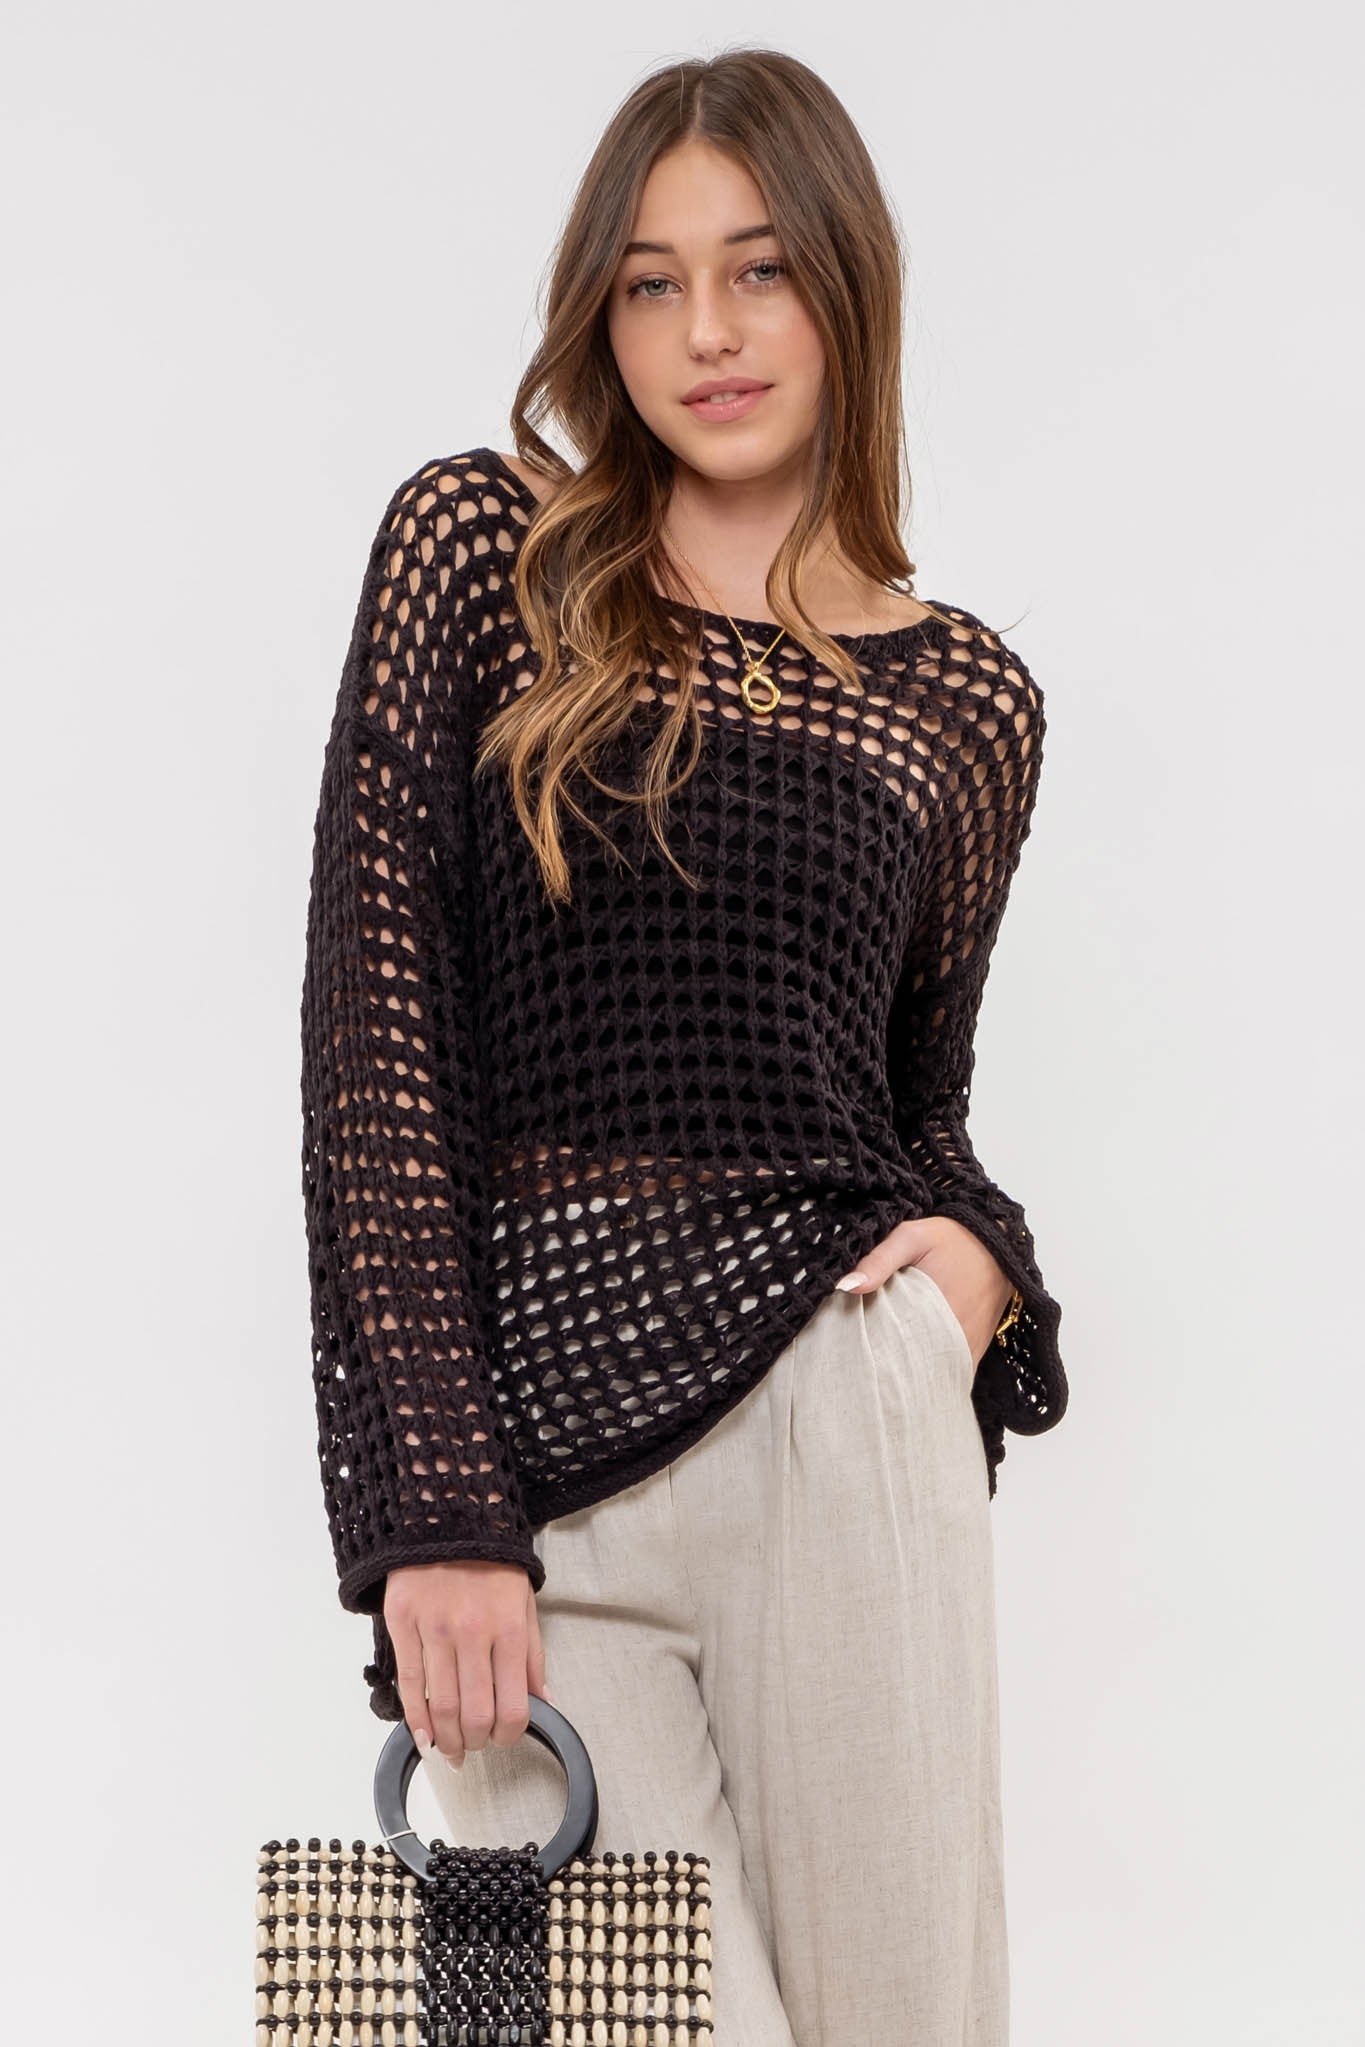 Over Sized Sheer Crochet Pullover (2 Colors)